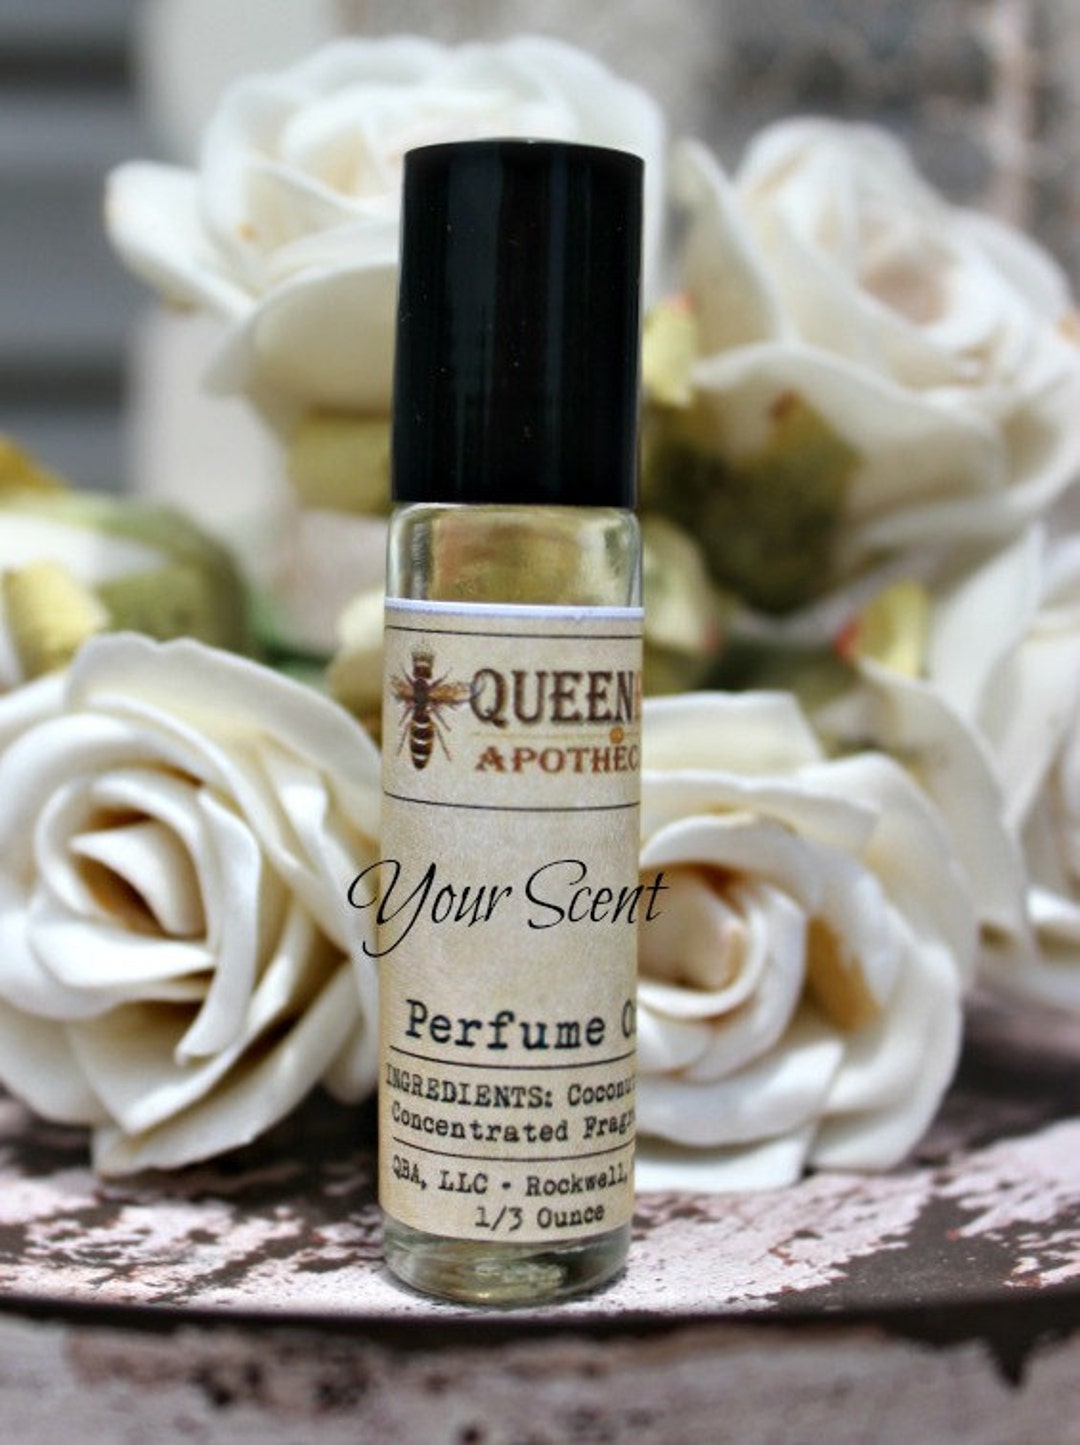 SOUTHERN GRACE Perfume Oil 1/3 Ounce Roll On 